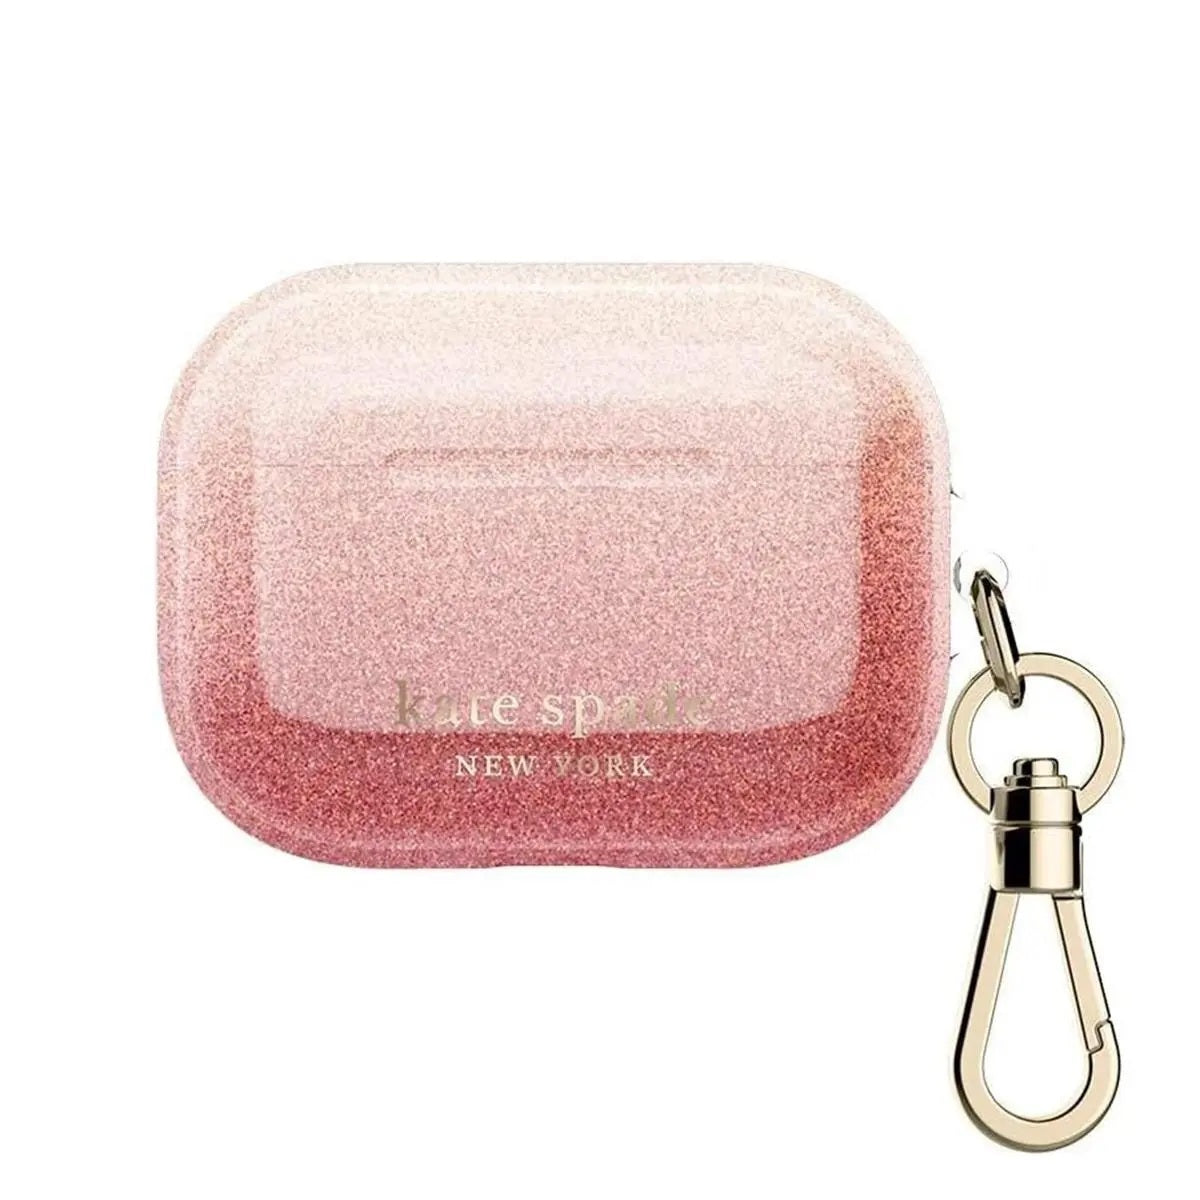 Kate Spade New York AirPods Pro Case (Ombre Glitter Sunset/Pink Multi/Gold Foil Logo)